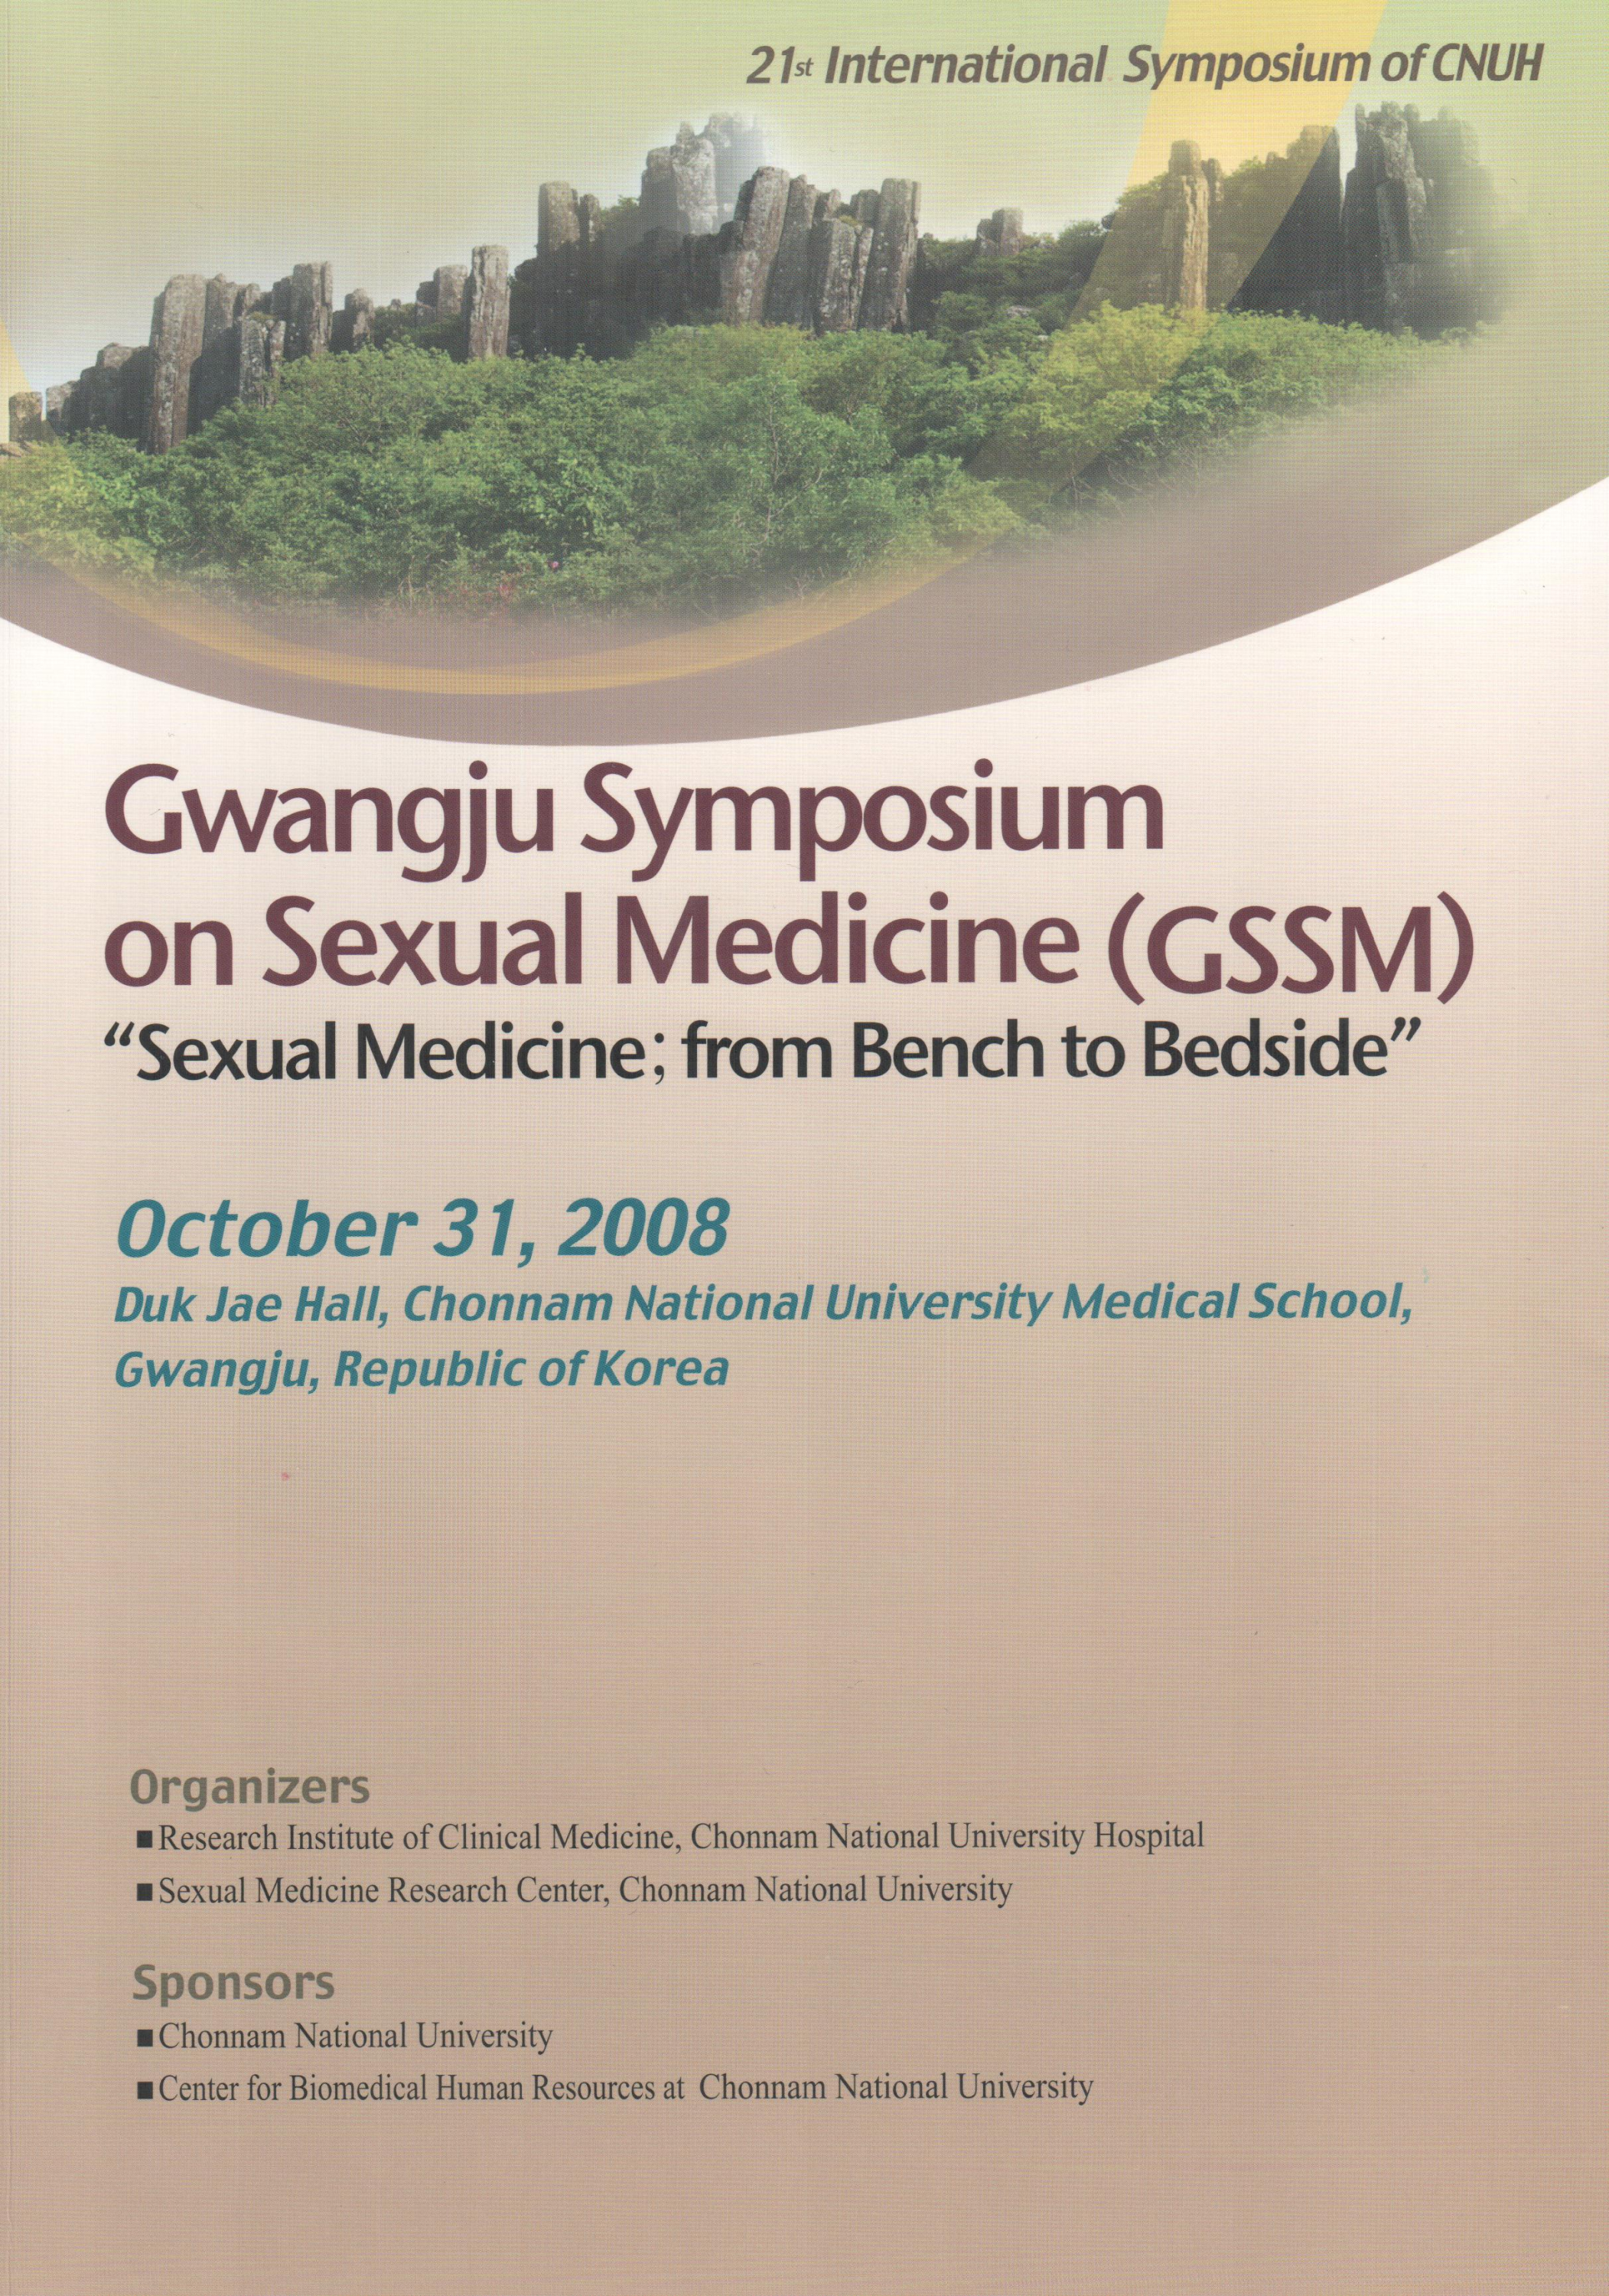 21th International symposium - Sexual Medicine; from Bench to Bedside 첨부파일 : 1562588994.jpg